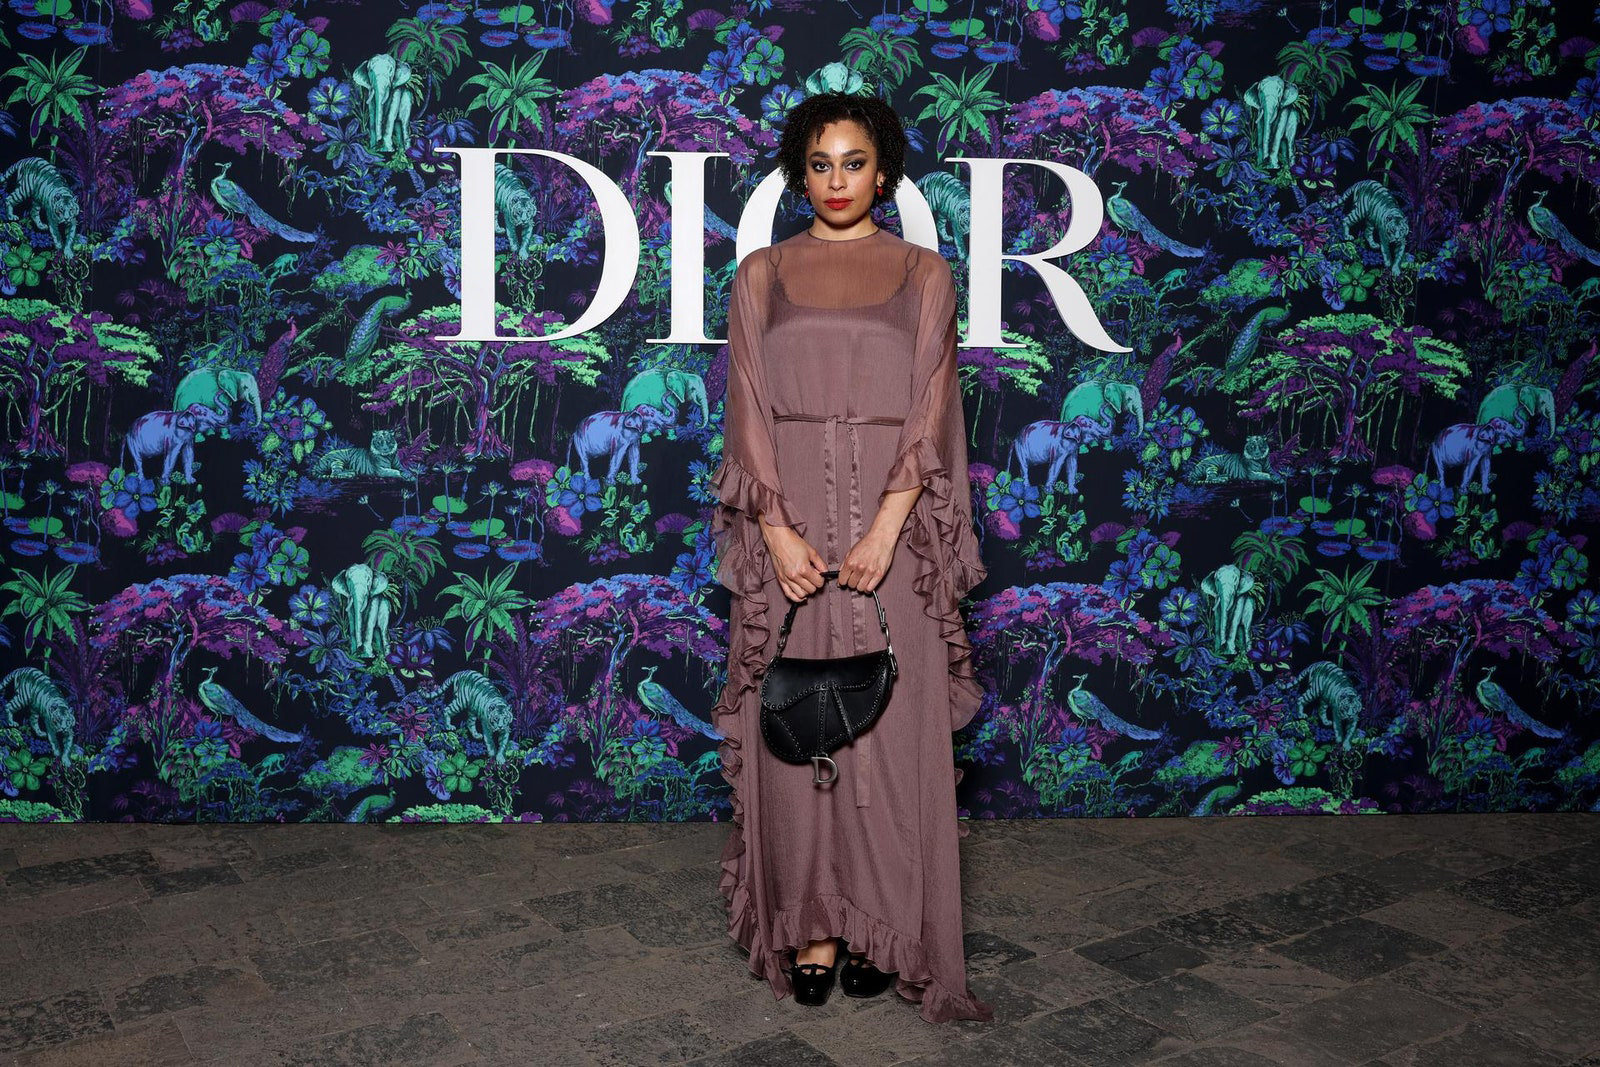 Dior Fall/Winter 2023 Show In Mumbai Celeste Epiphany Waite wore a Dior pink silk dress with a Dior bag and shoes.